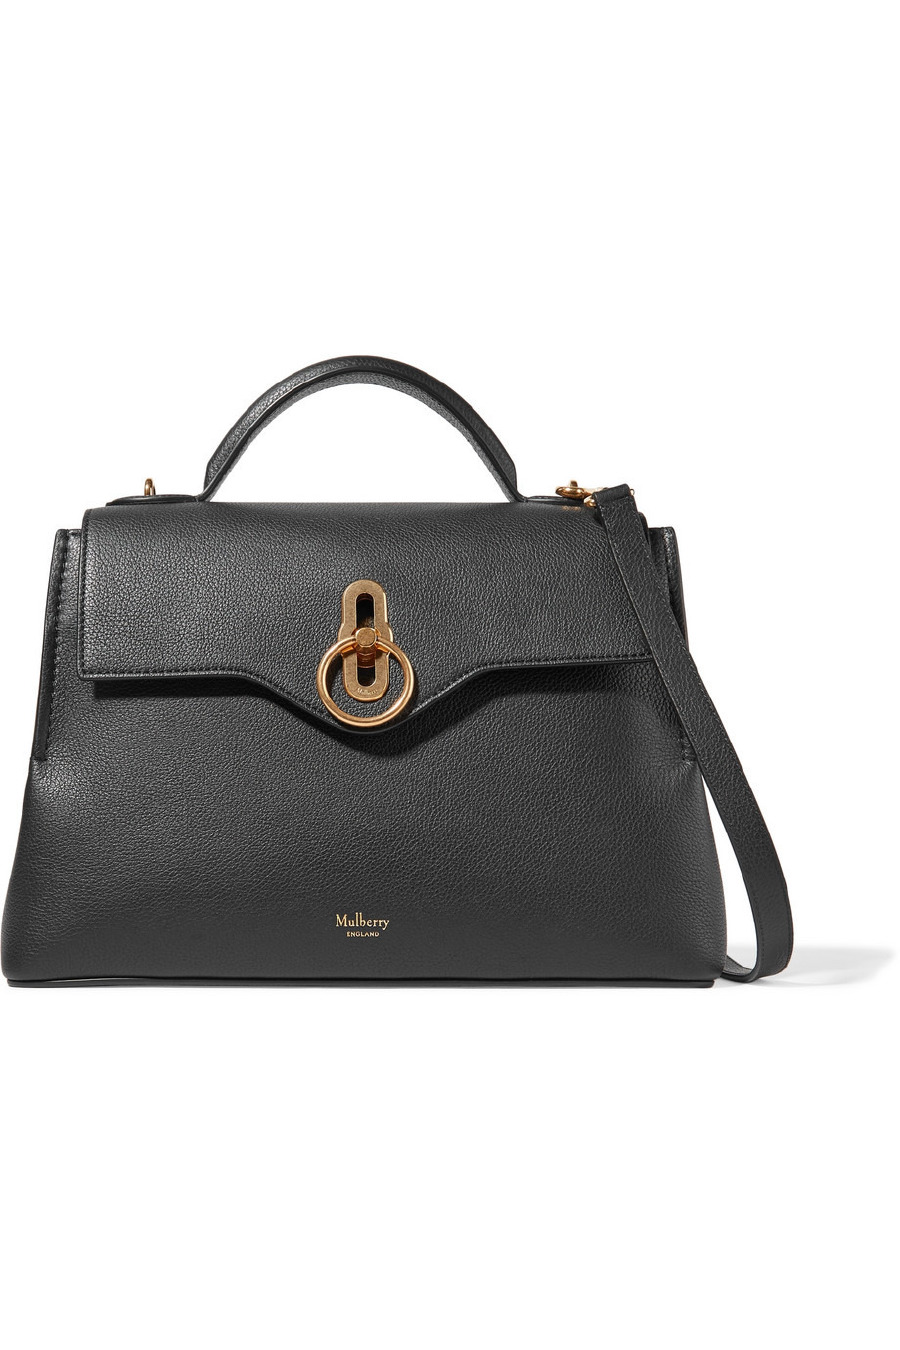 Mulberry 1195 Euro